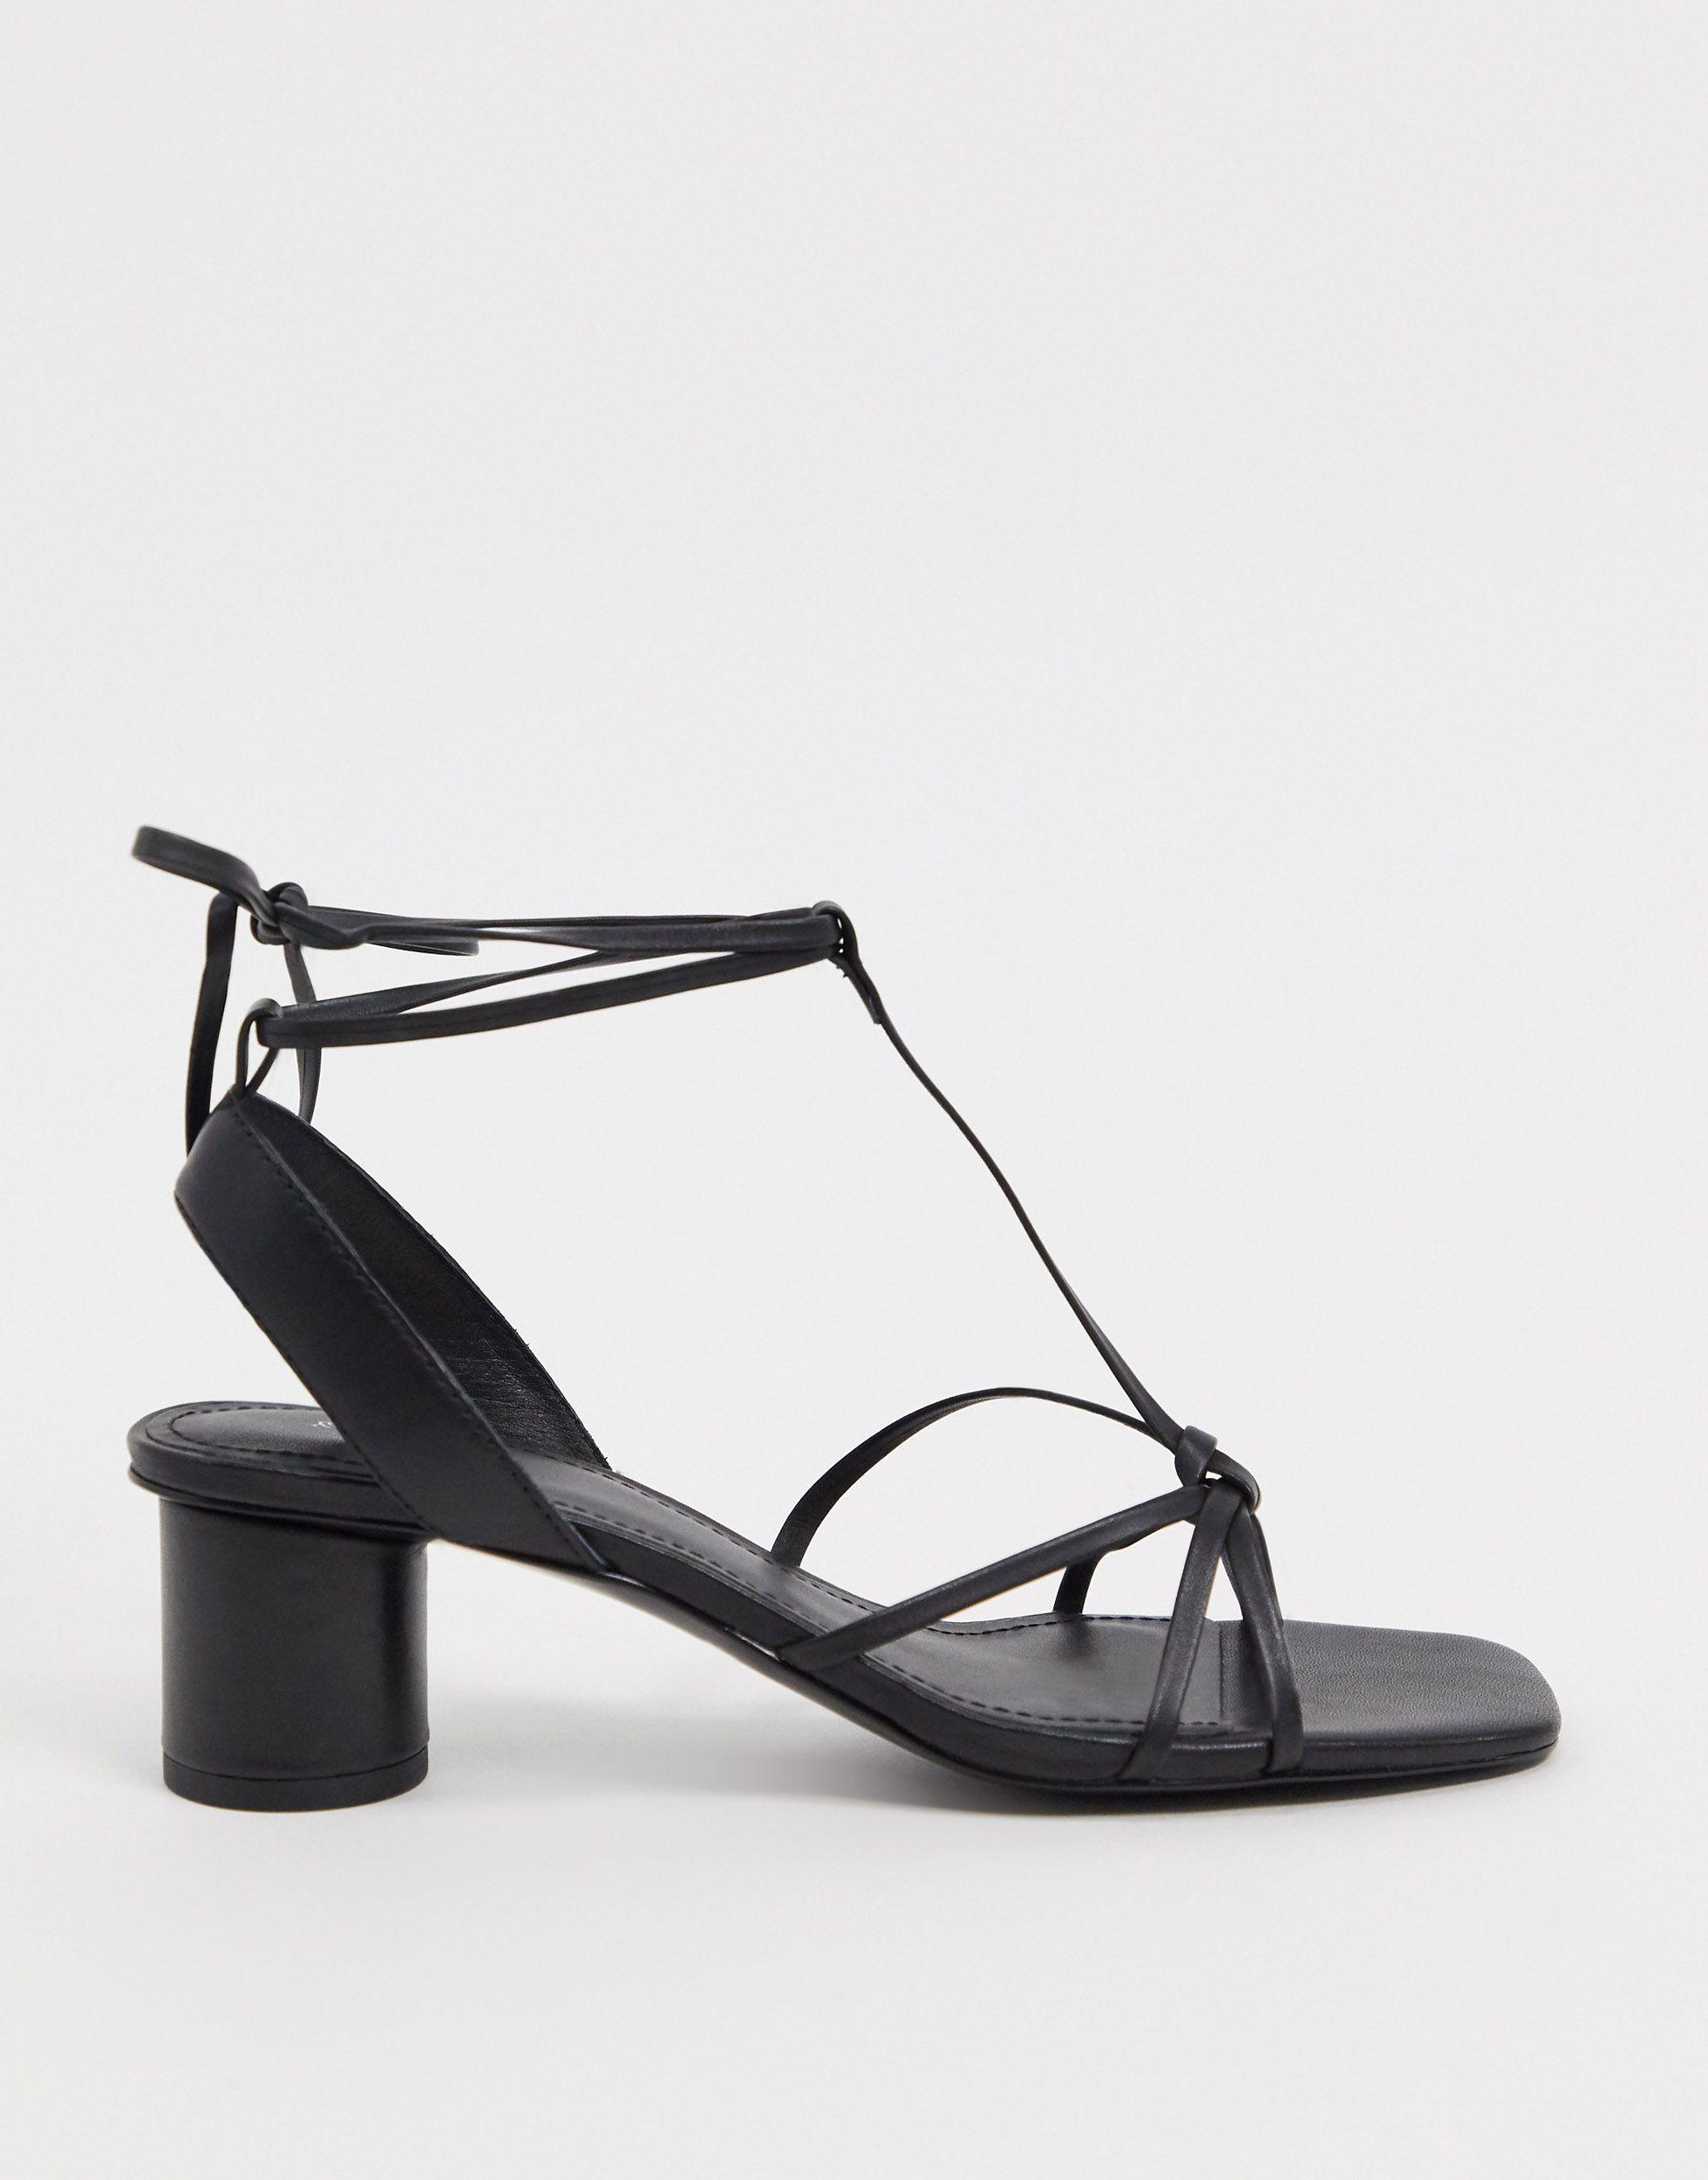 & Other Stories Leather Square Toe Sandal With Round Heel in Black - Lyst